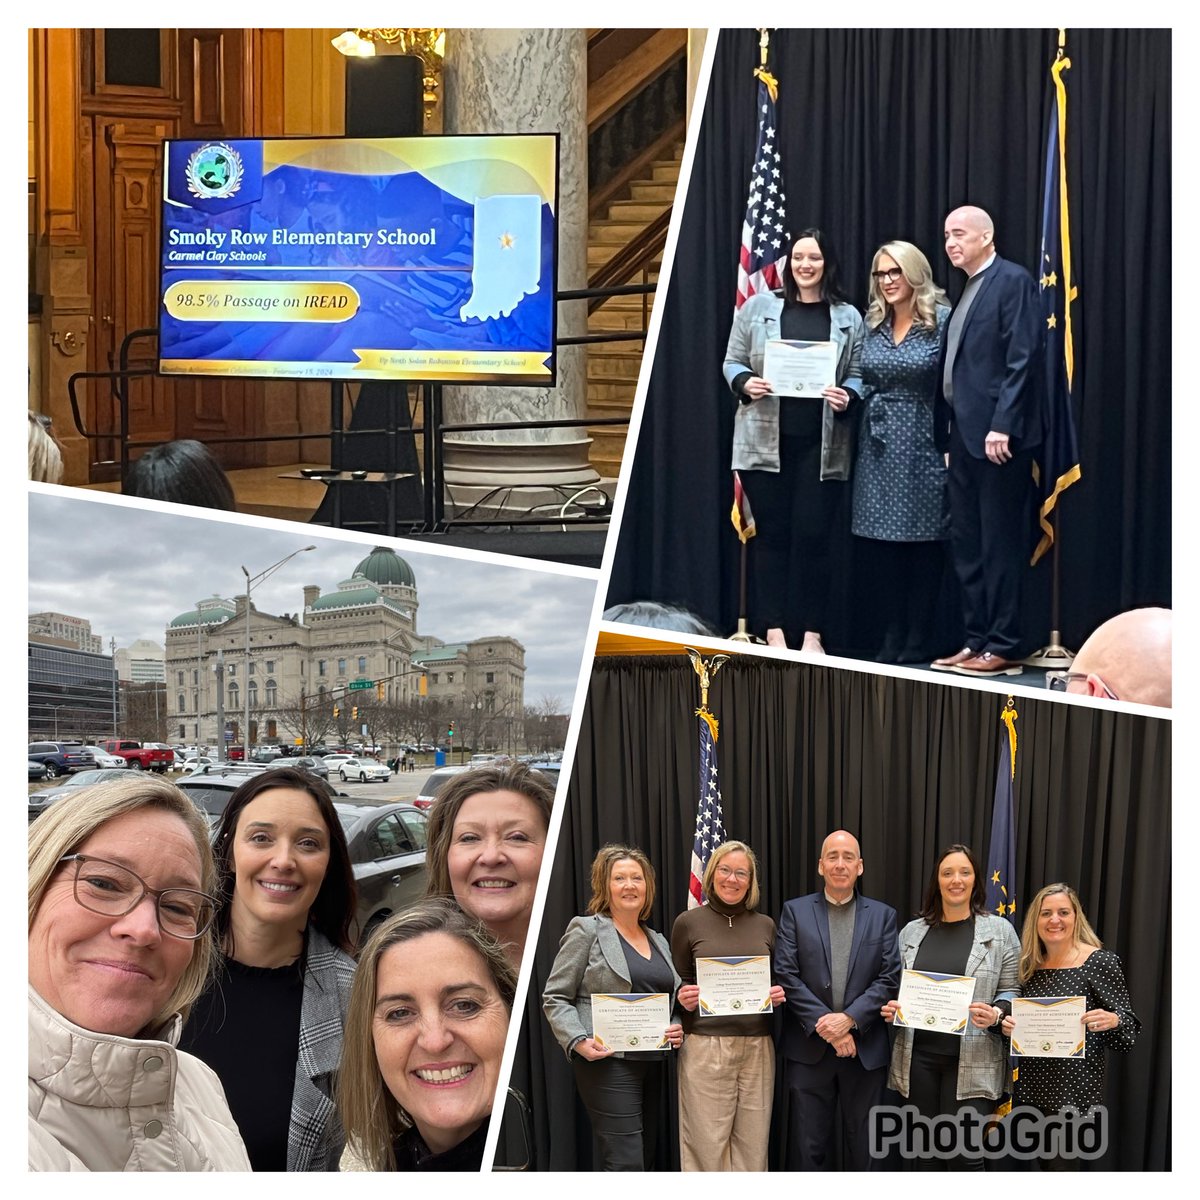 Proud to represent SRE and the awesome efforts of our staff and students downtown at the statehouse this week! Congratulations! 🚀